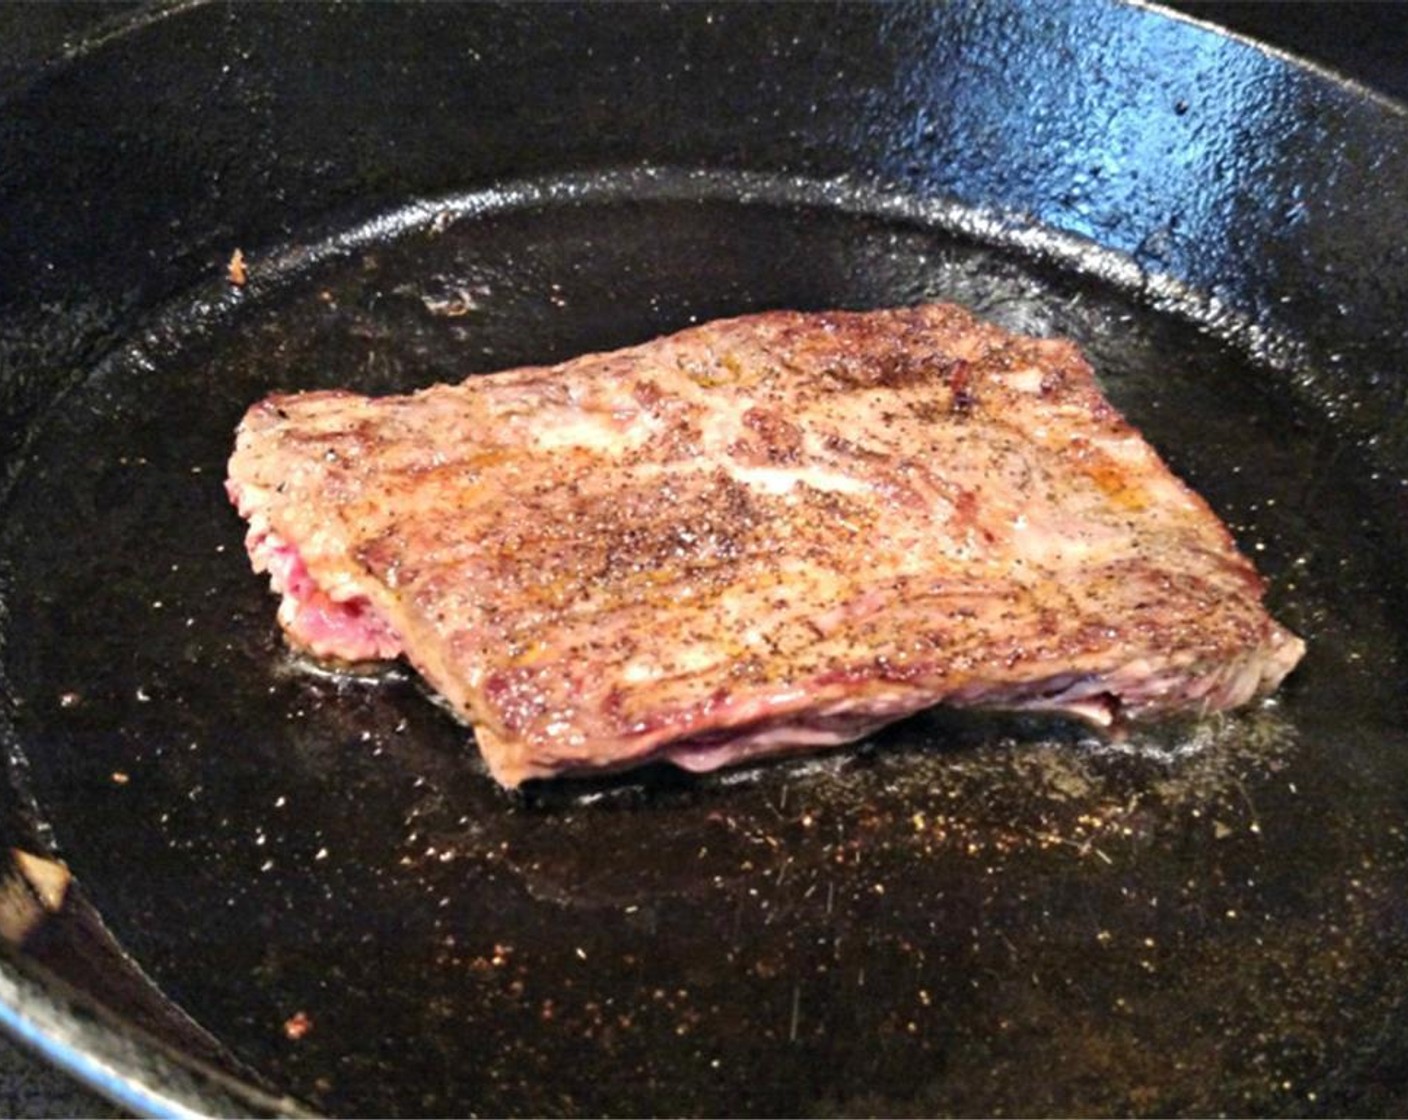 step 5 Once your beef has rested after being tenderized, cut the beef into equal portions and heat up the skillet you used to saute the vegetables. Add another tablespoon or so of extra virgin olive oil and cook beef for two and a half minutes on one side over medium heat.